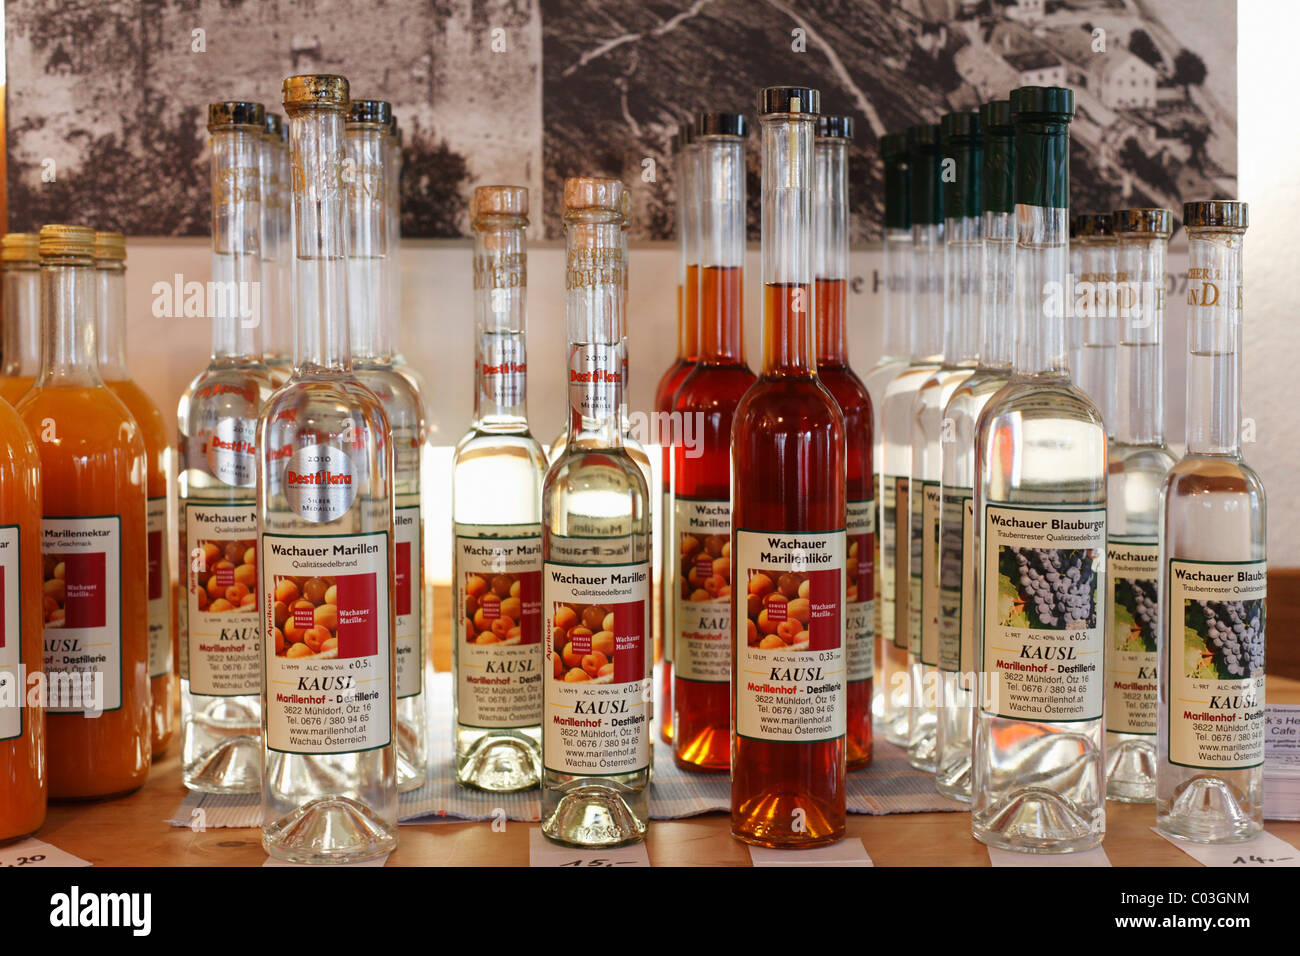 Bottles of schnapps and liquor from apricots and grapes, Wachau, Waldviertel, Lower Austria, Austria, Europe Stock Photo